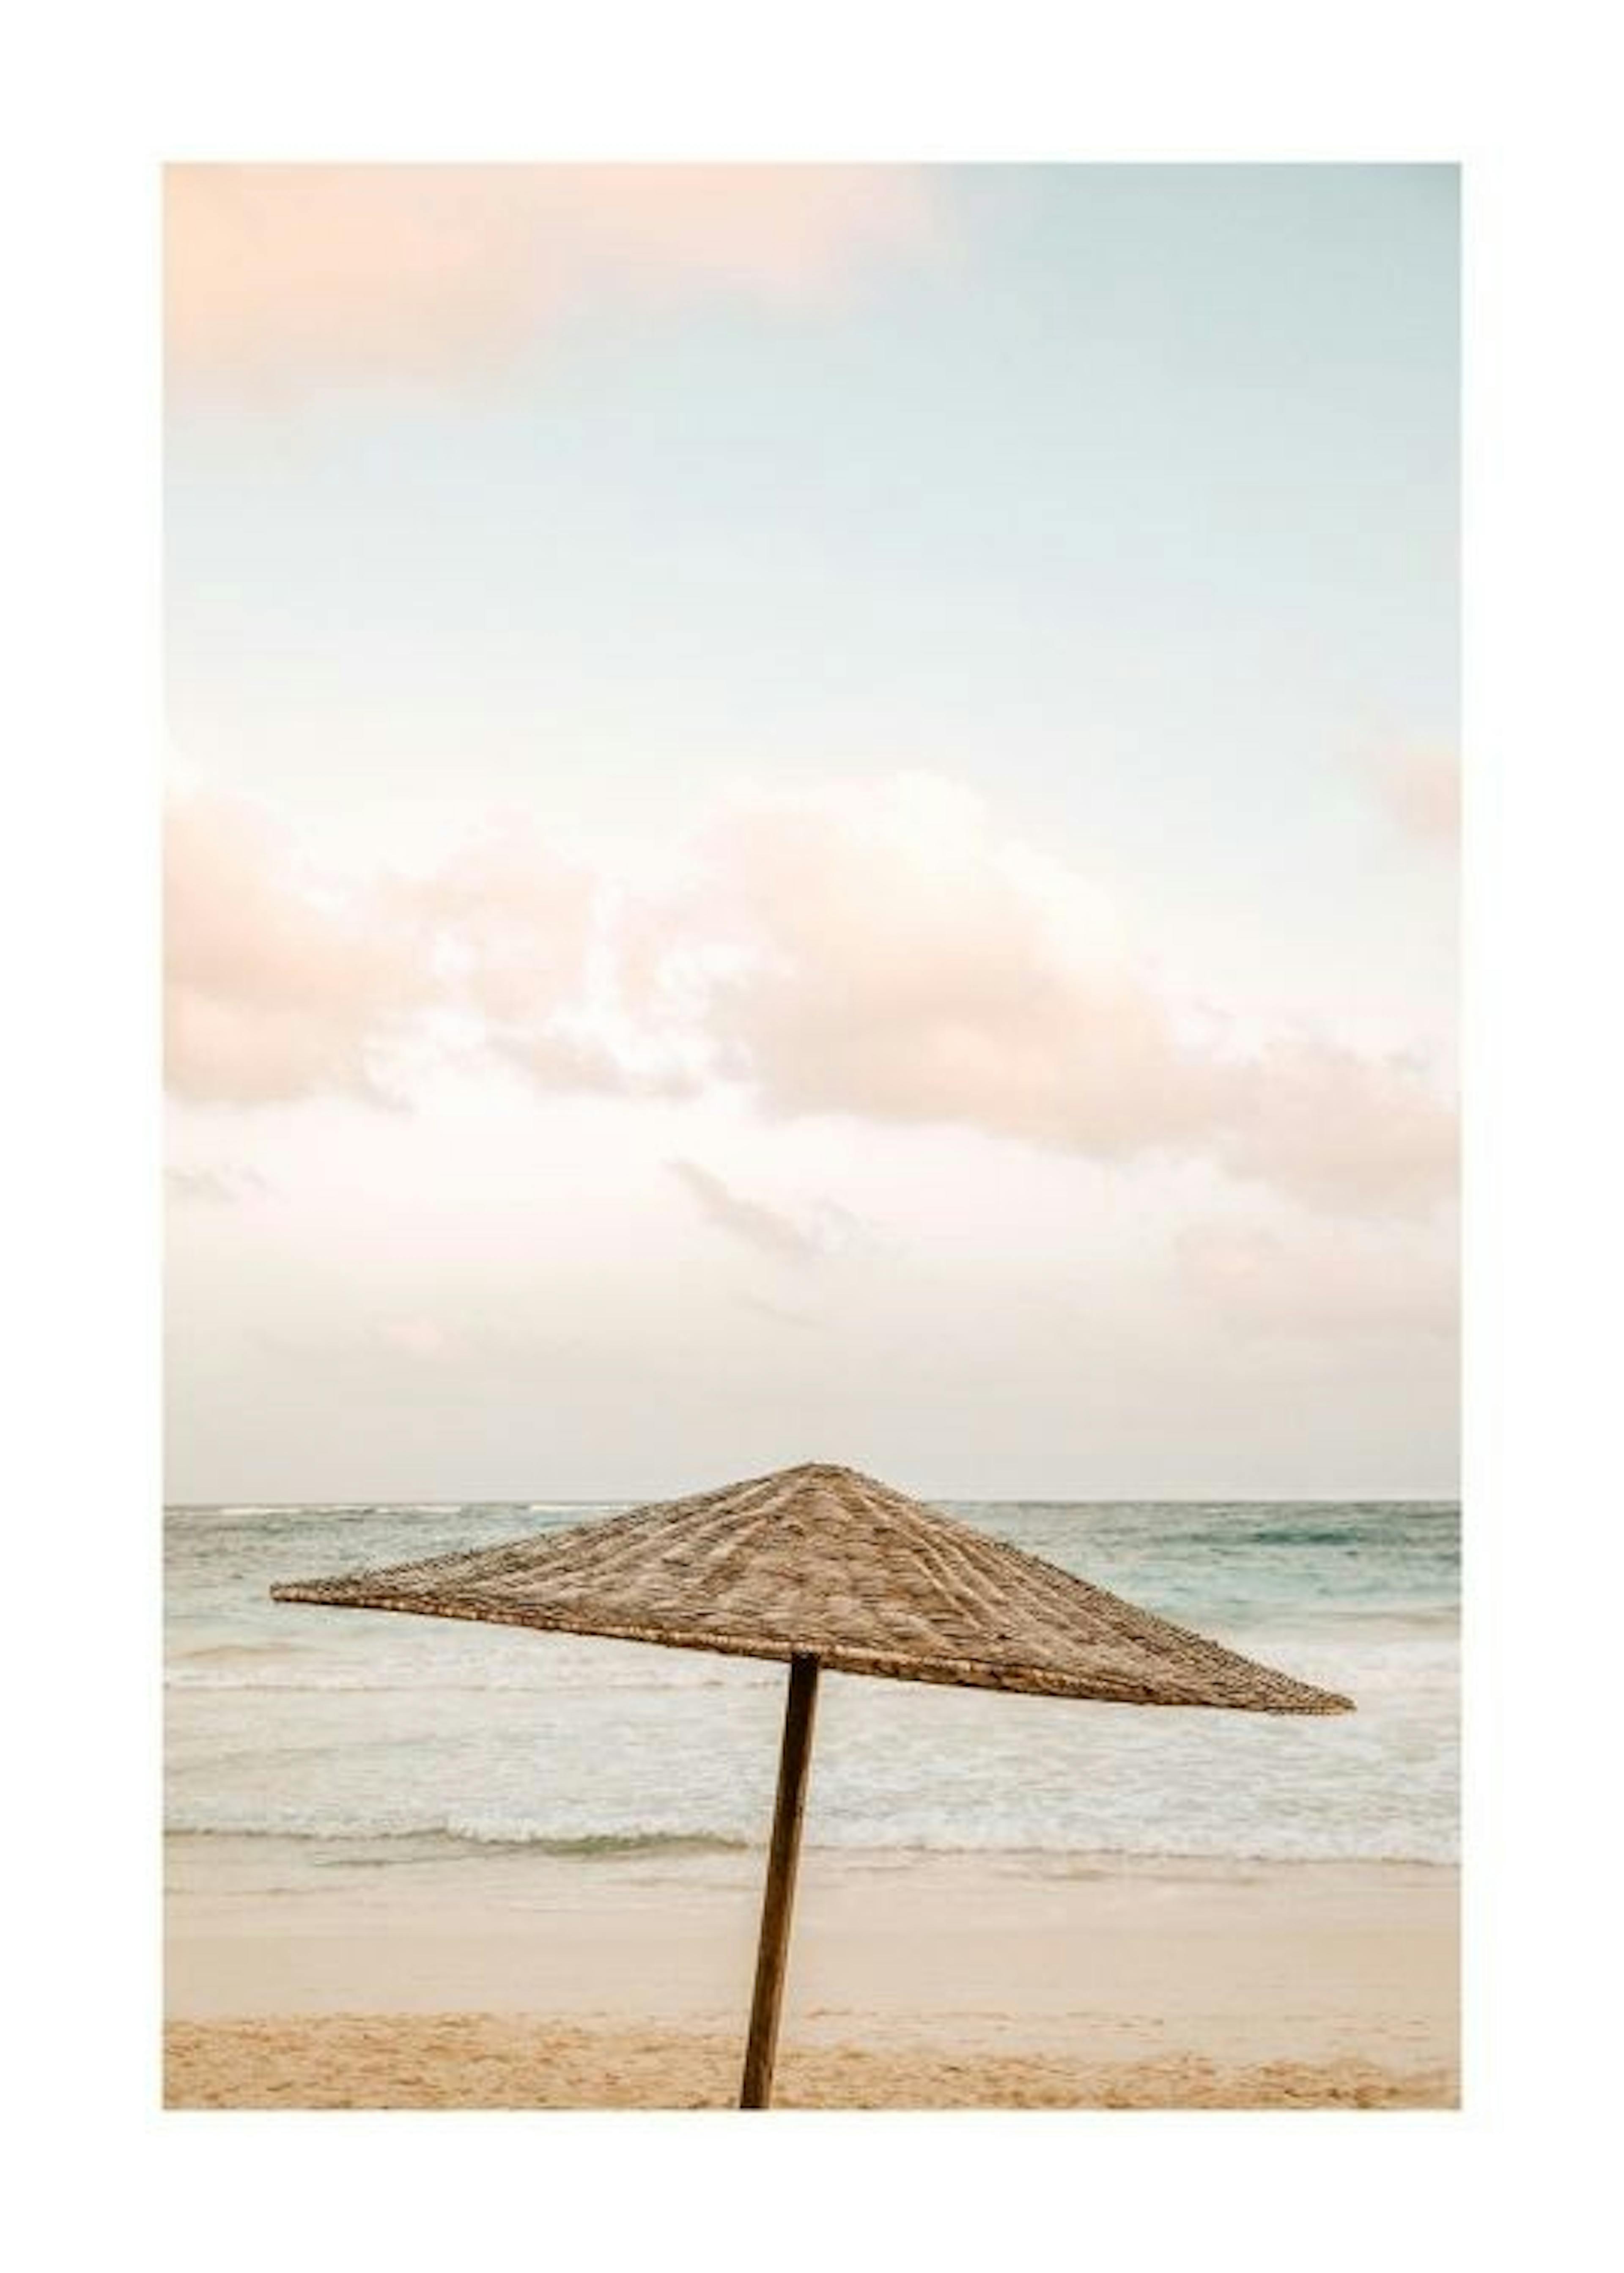 Parasol by the Ocean Poster